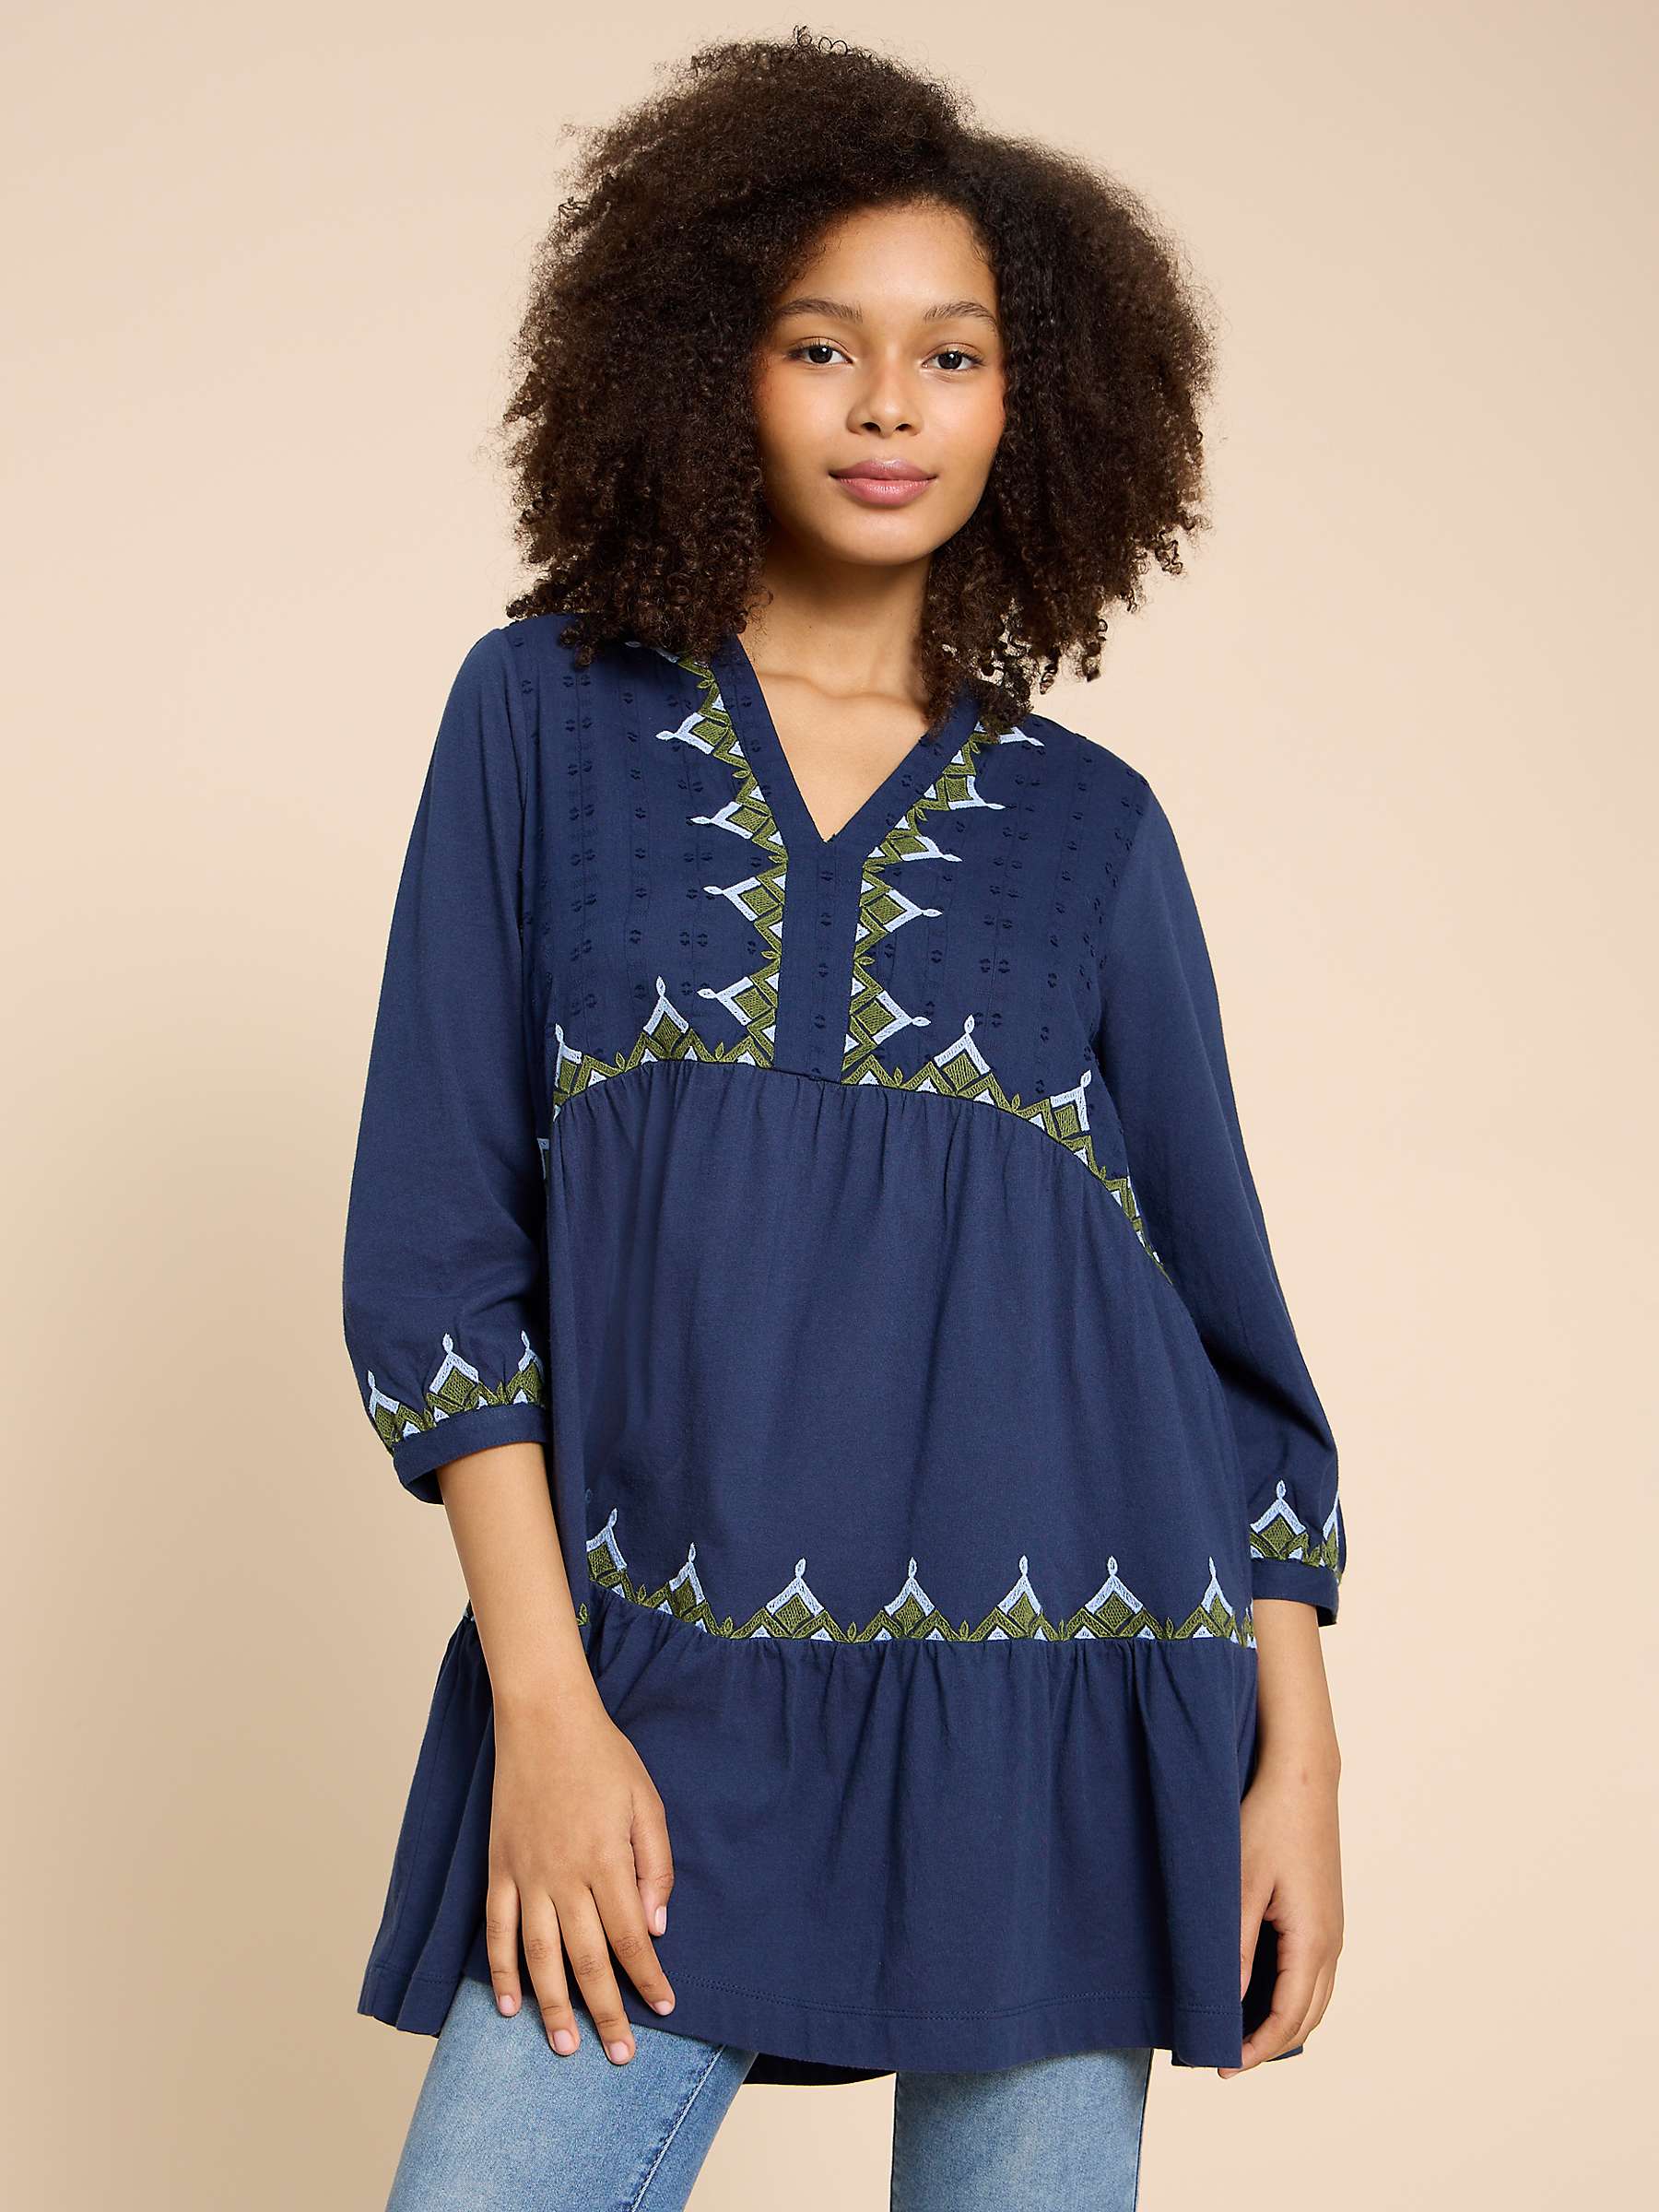 Buy White Stuff Embroidered Tunic Top, Navy/Multi Online at johnlewis.com